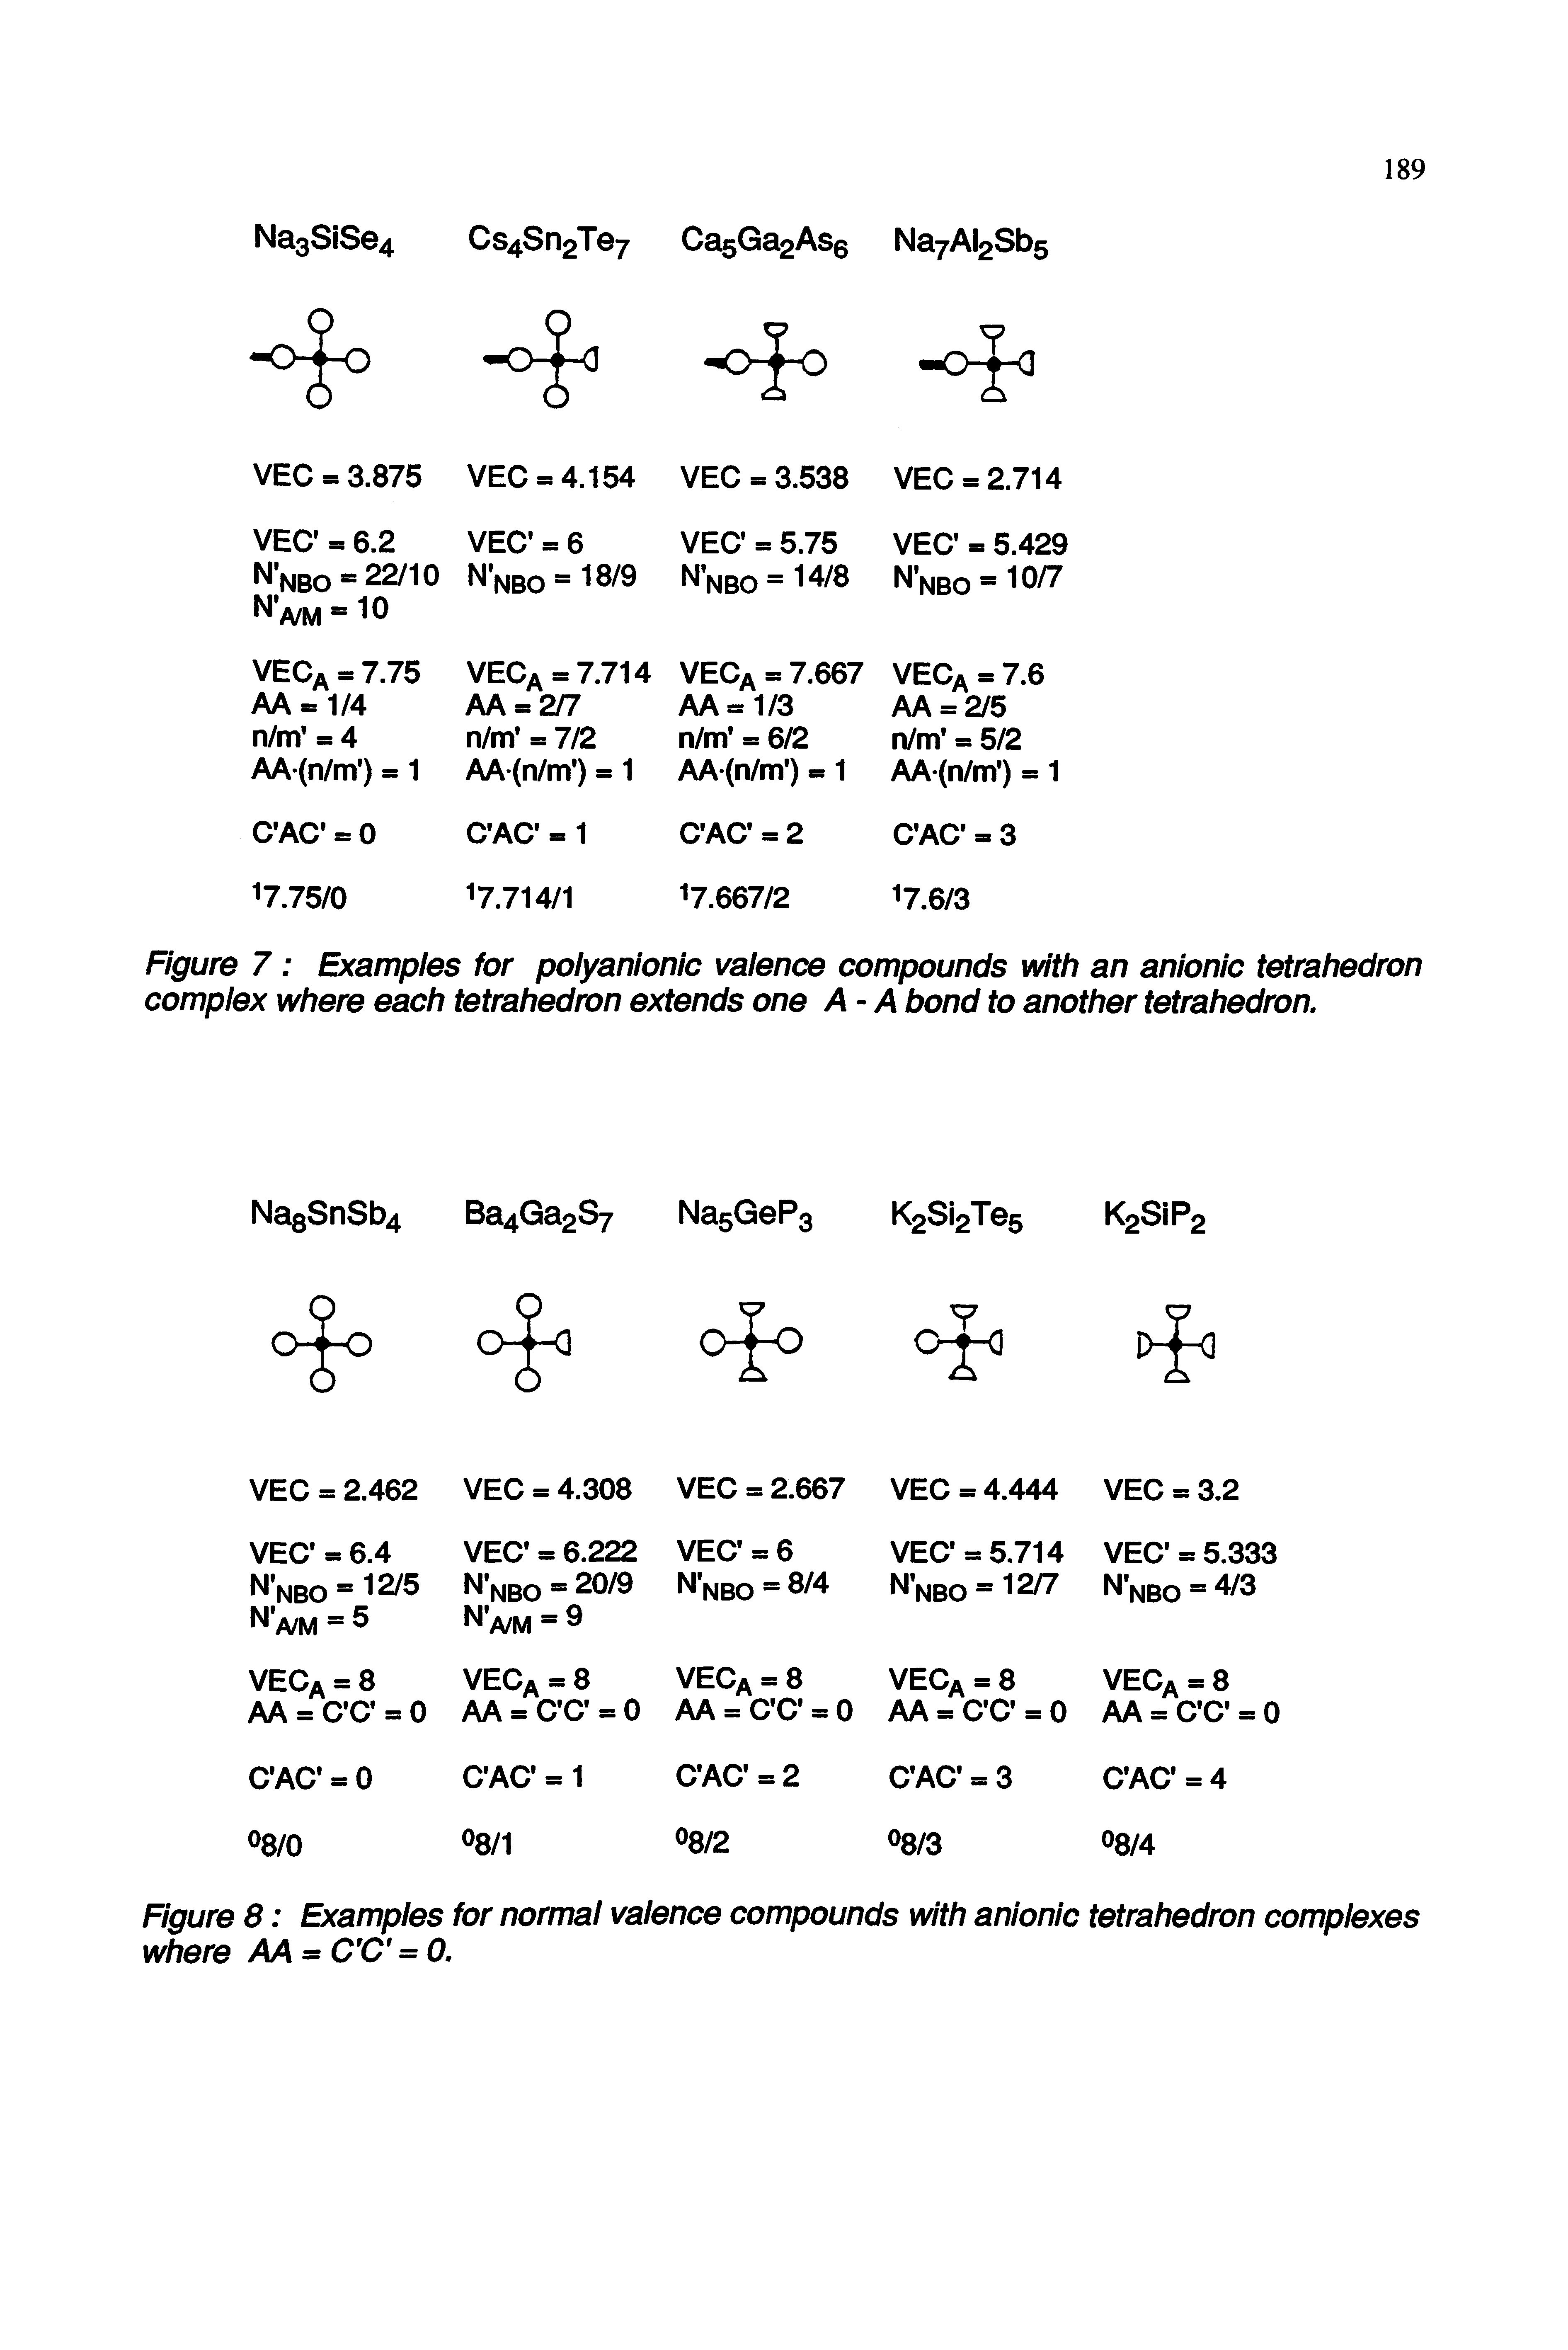 Figure 8 Examples for normal valence compounds with anionic tetrahedron complexes where AA = C C =0.